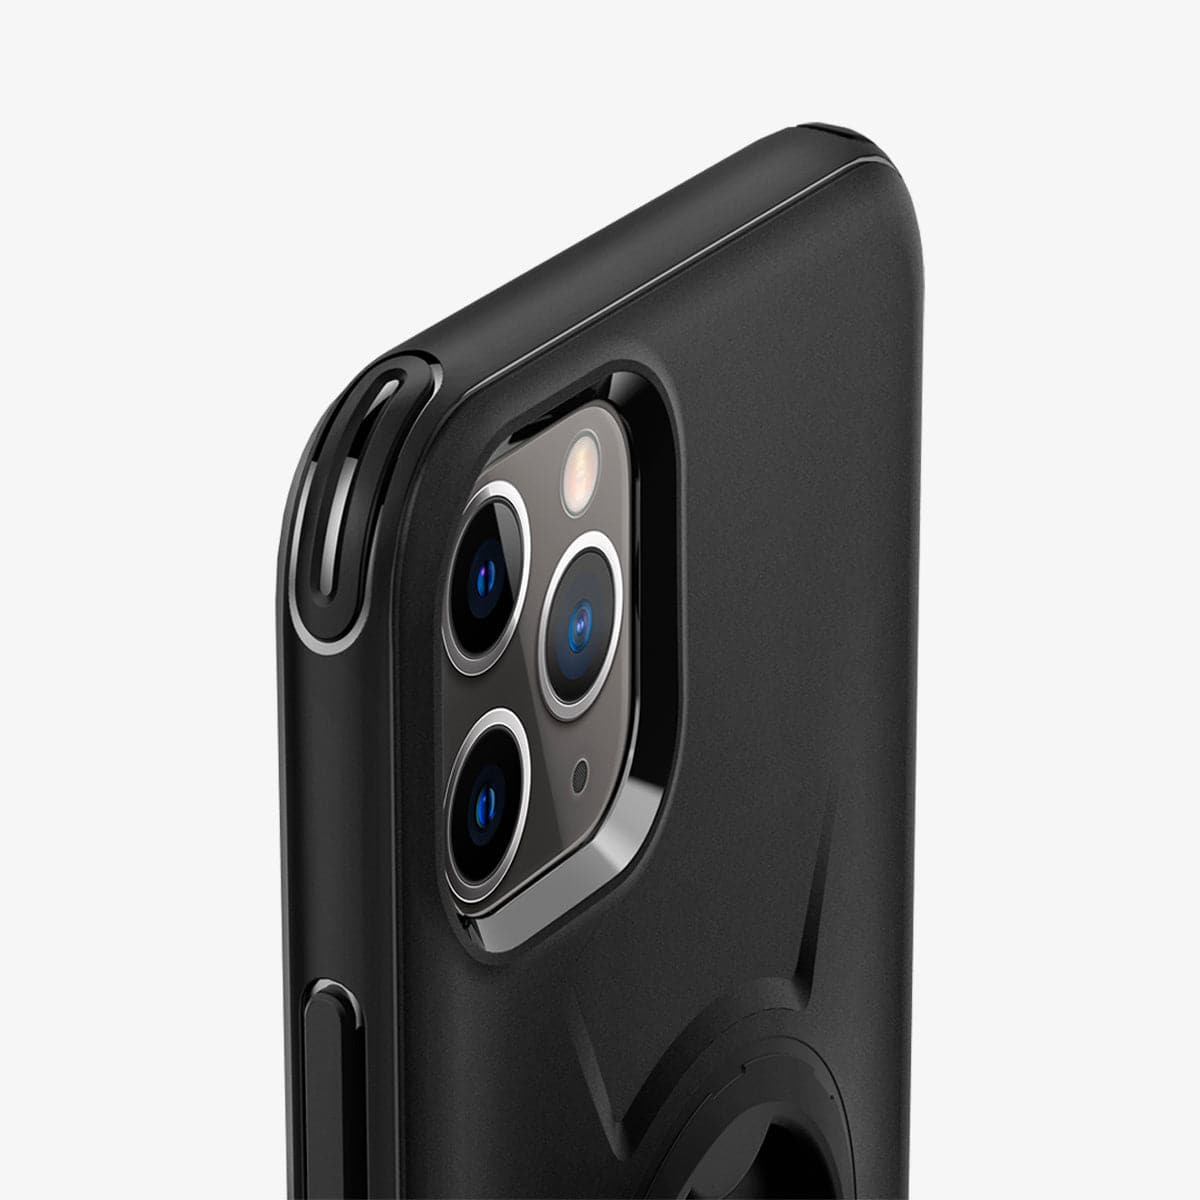 ACS00277 - iPhone 11 Pro Max Case Gearlock Bike Mount in black showing the back and side zoomed in on camera lens